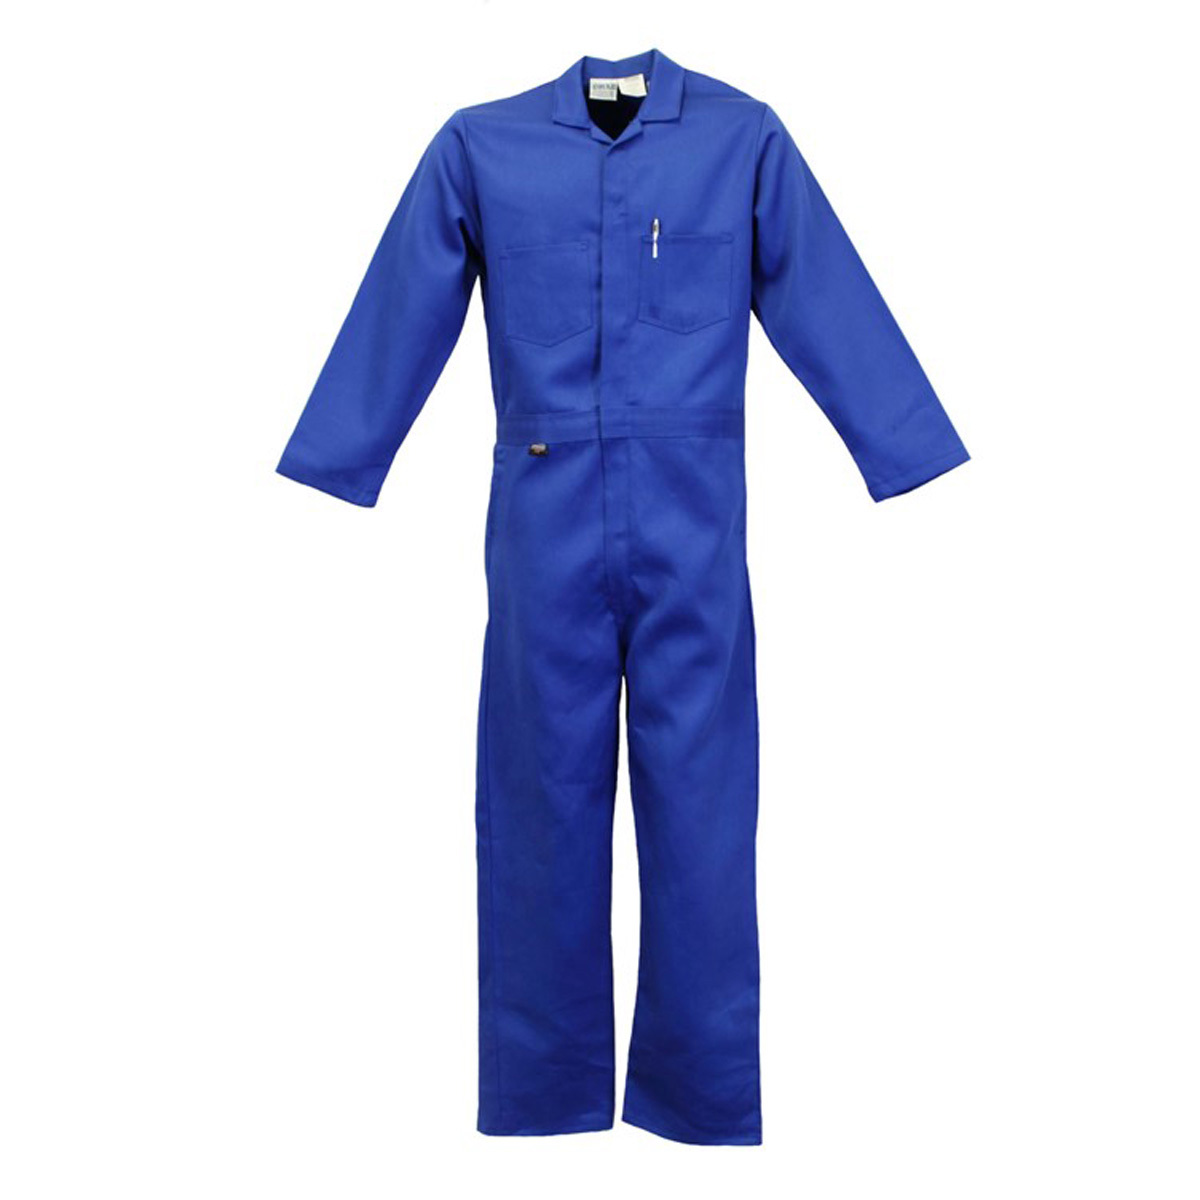 Stanco Safety Products™ Small Royal Blue Indura® Arc Rated Flame Resistant Coveralls With Front Zipper Closure